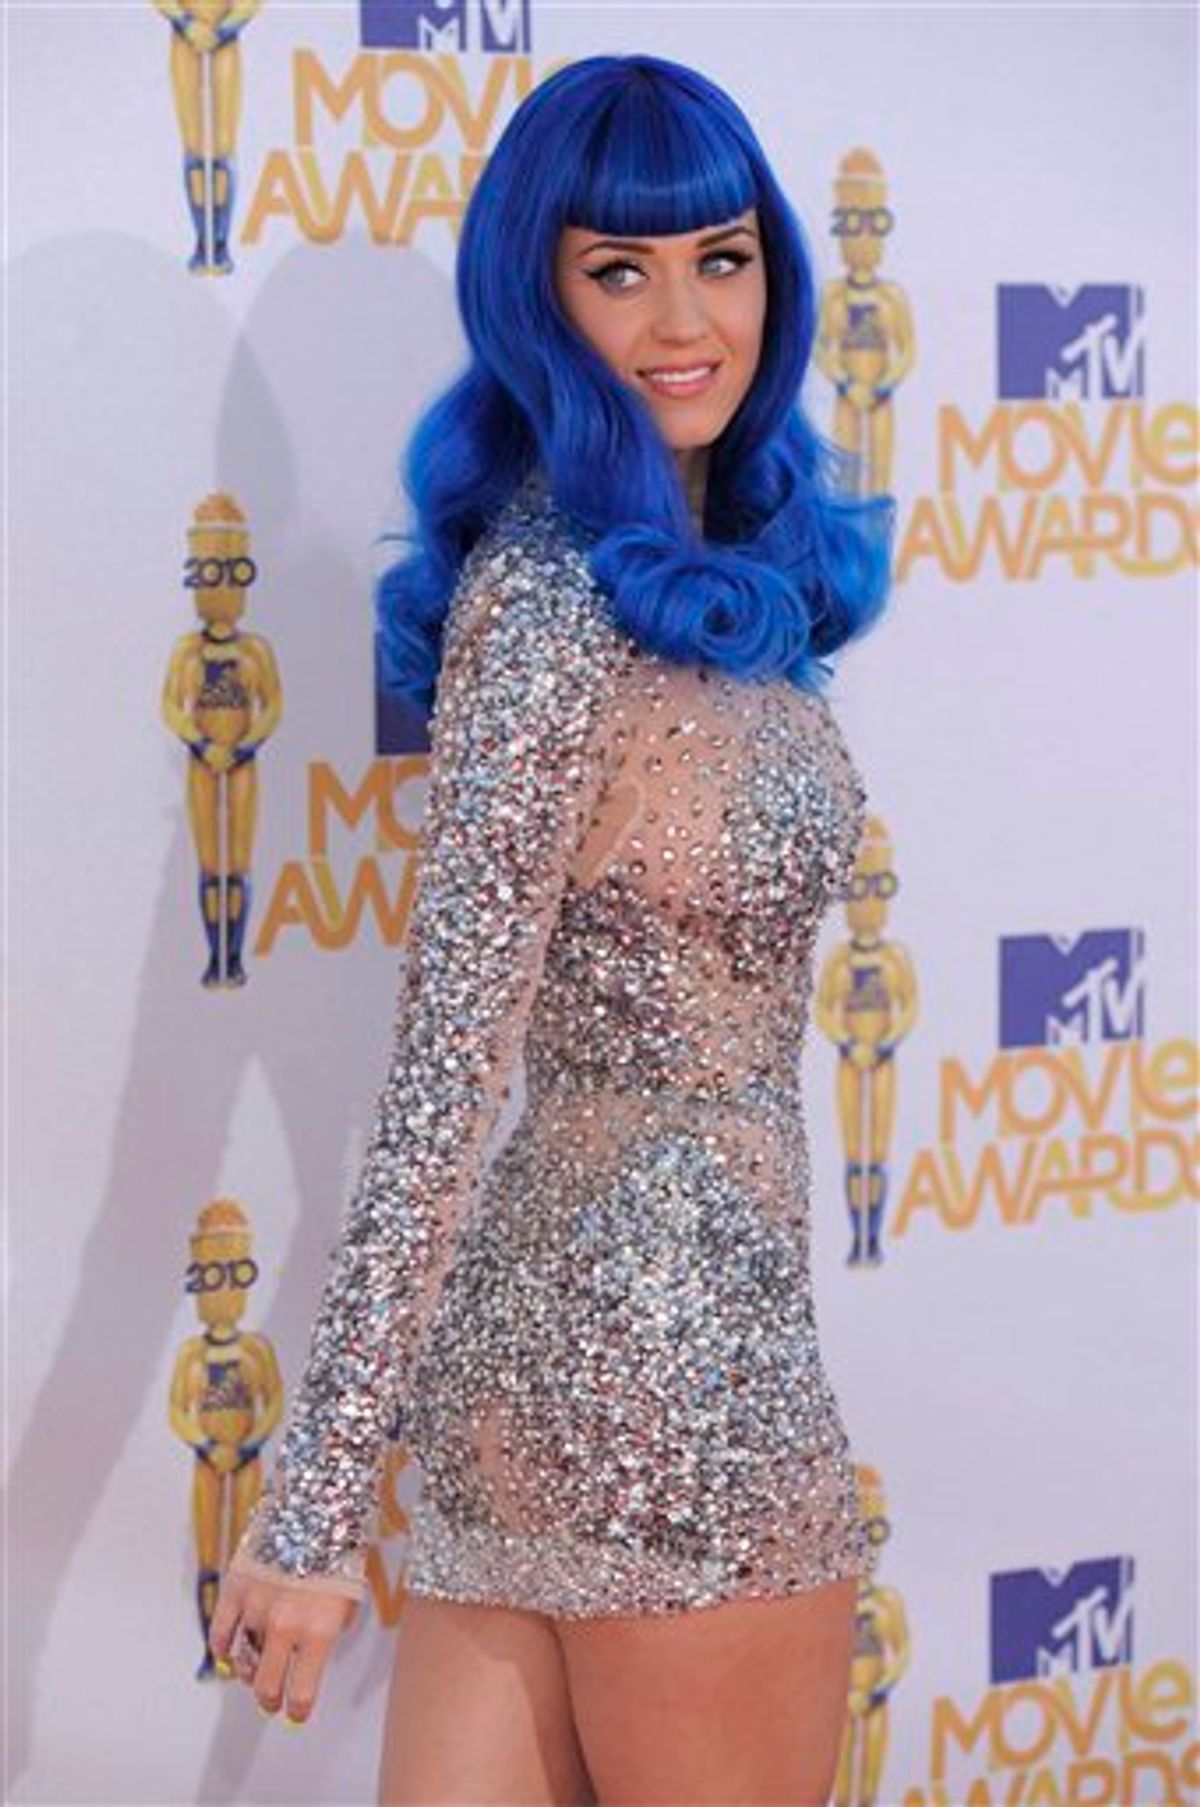 Katy Perry arrives at the MTV Movie Awards in Universal City, Calif., on Sunday, June 6, 2010. (AP Photo/Chris Pizzello) (AP)